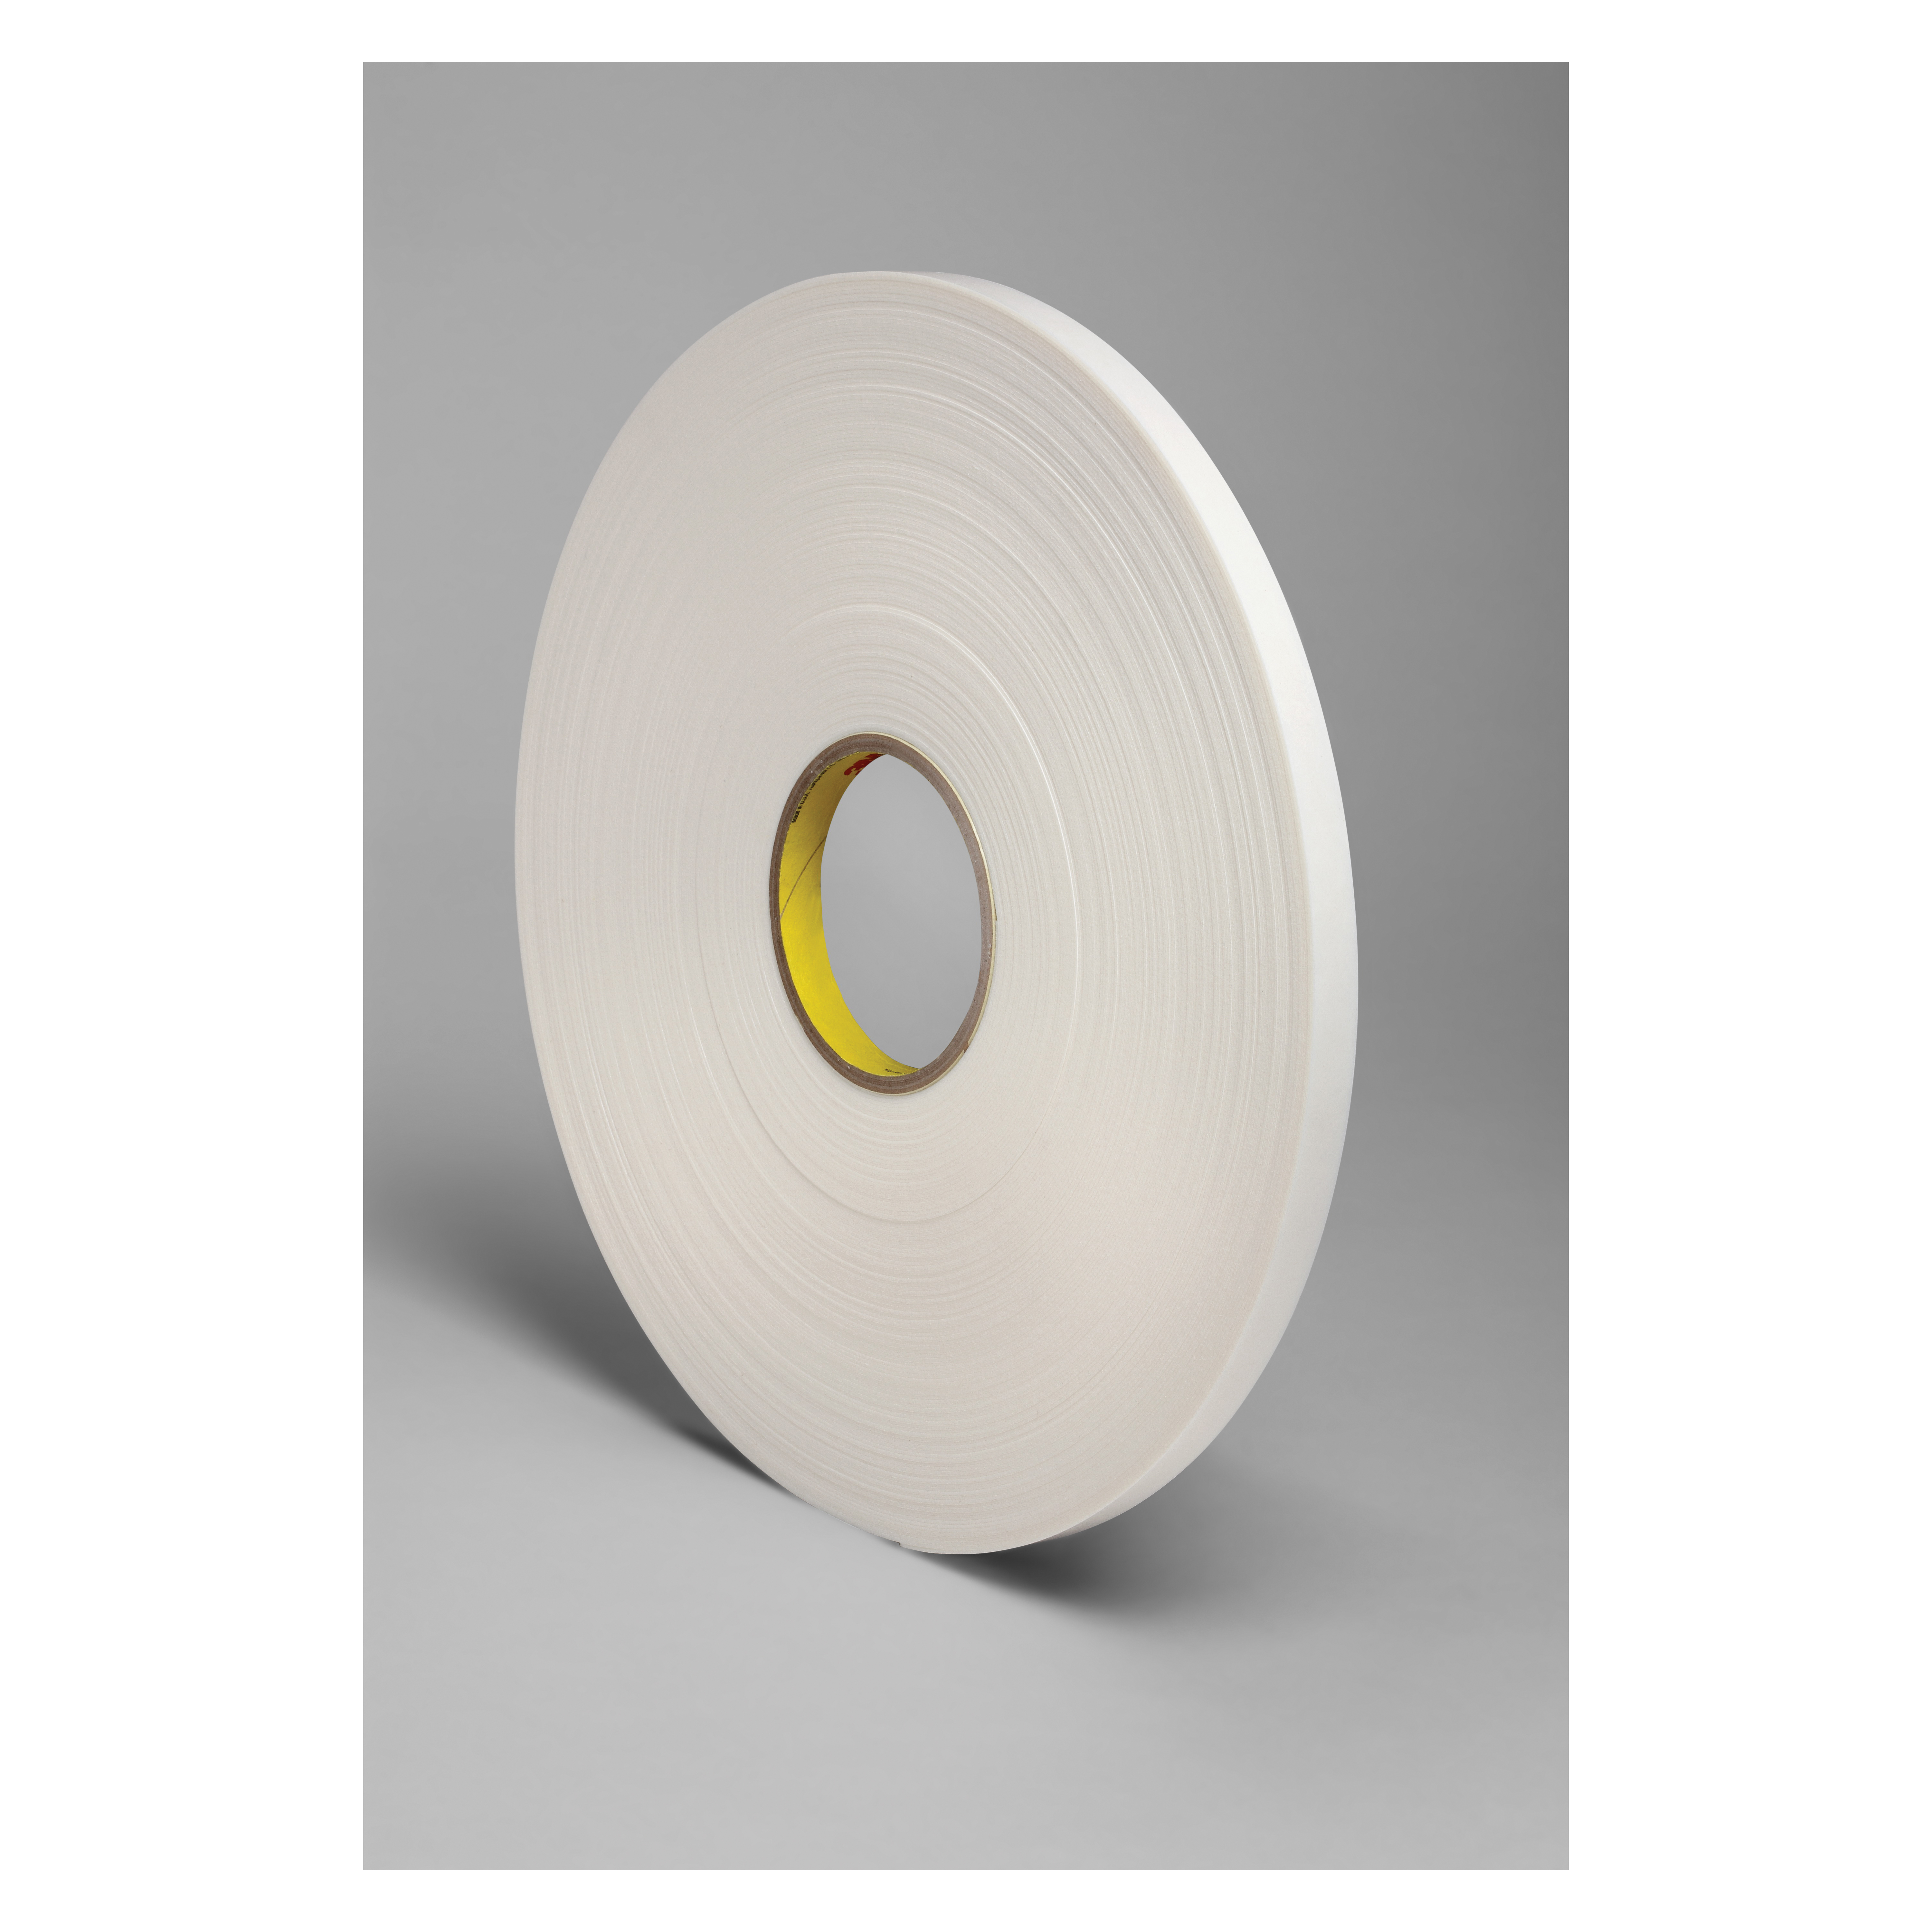 3M™ 021200-03406 Single Coated Foam Tape, 36 yd L x 1/2 in W, 125 mil THK, Acrylic Adhesive, Urethane Foam Backing, Natural